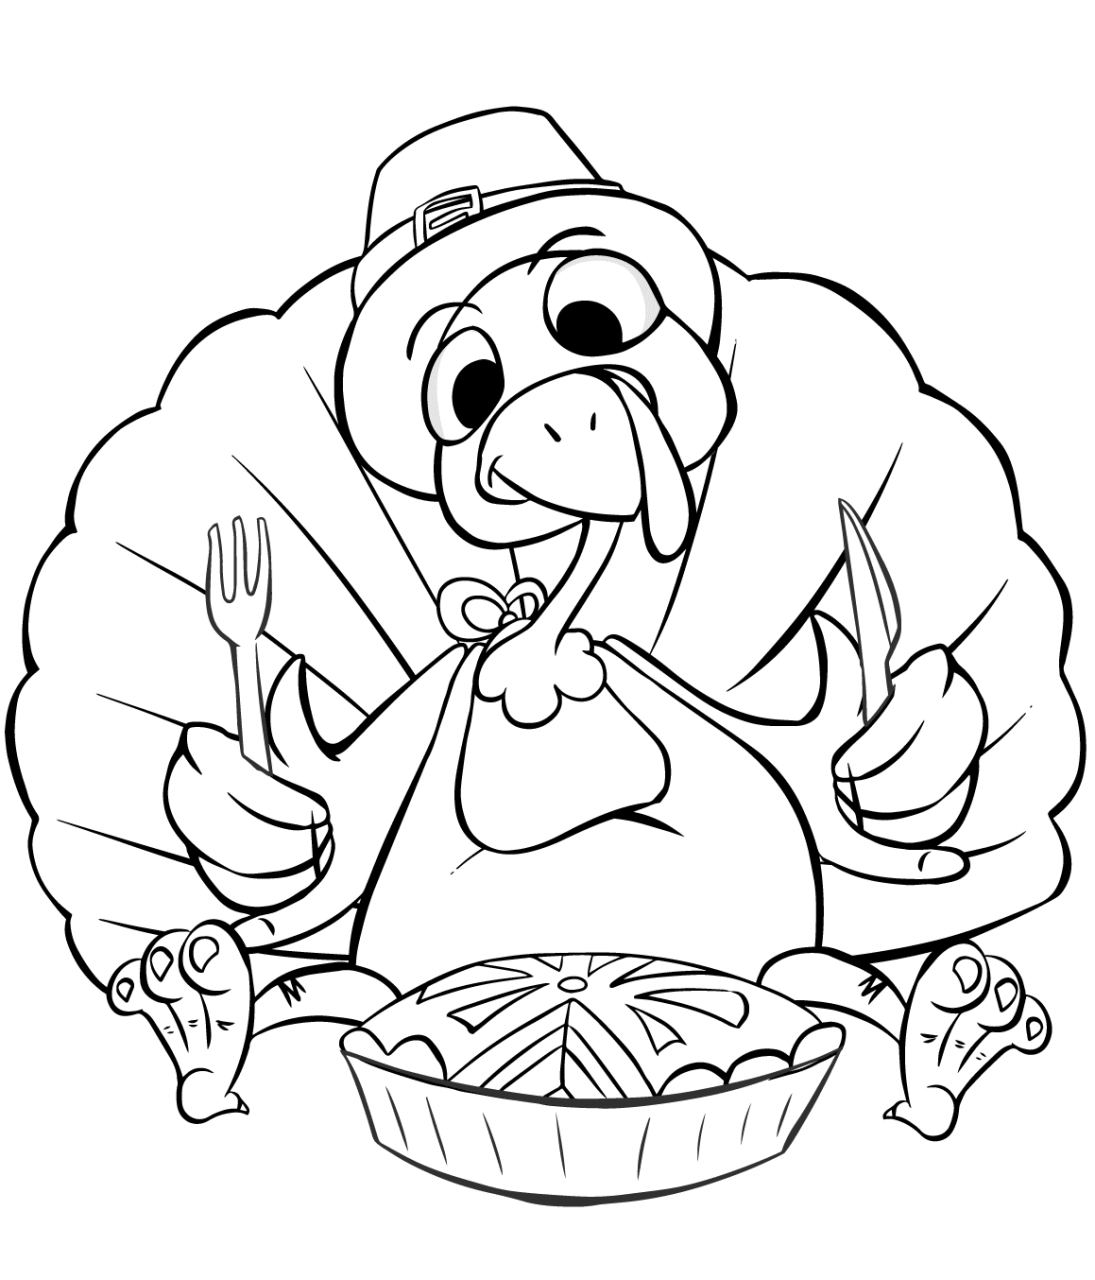 Thanksgiving Coloring Pages Free Printable Turkey Coloring Pages For